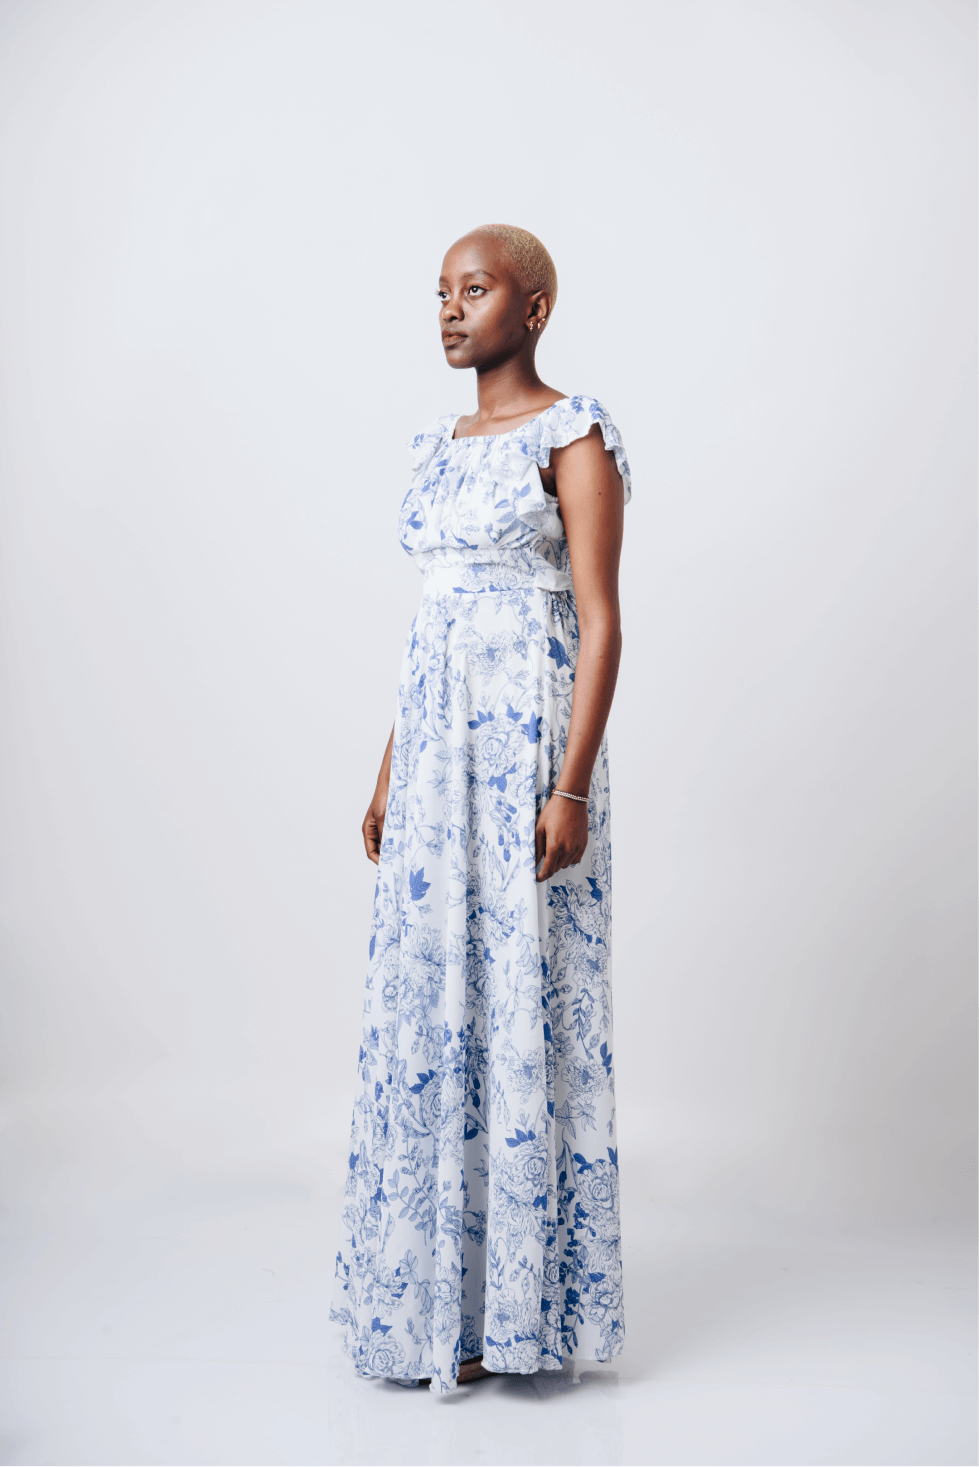 Shop Bahari White & Blue Floral Maxi Dress by Cyami Custom Fit on Arrai. Discover stylish, affordable clothing, jewelry, handbags and unique handmade pieces from top Kenyan & African fashion brands prioritising sustainability and quality craftsmanship.